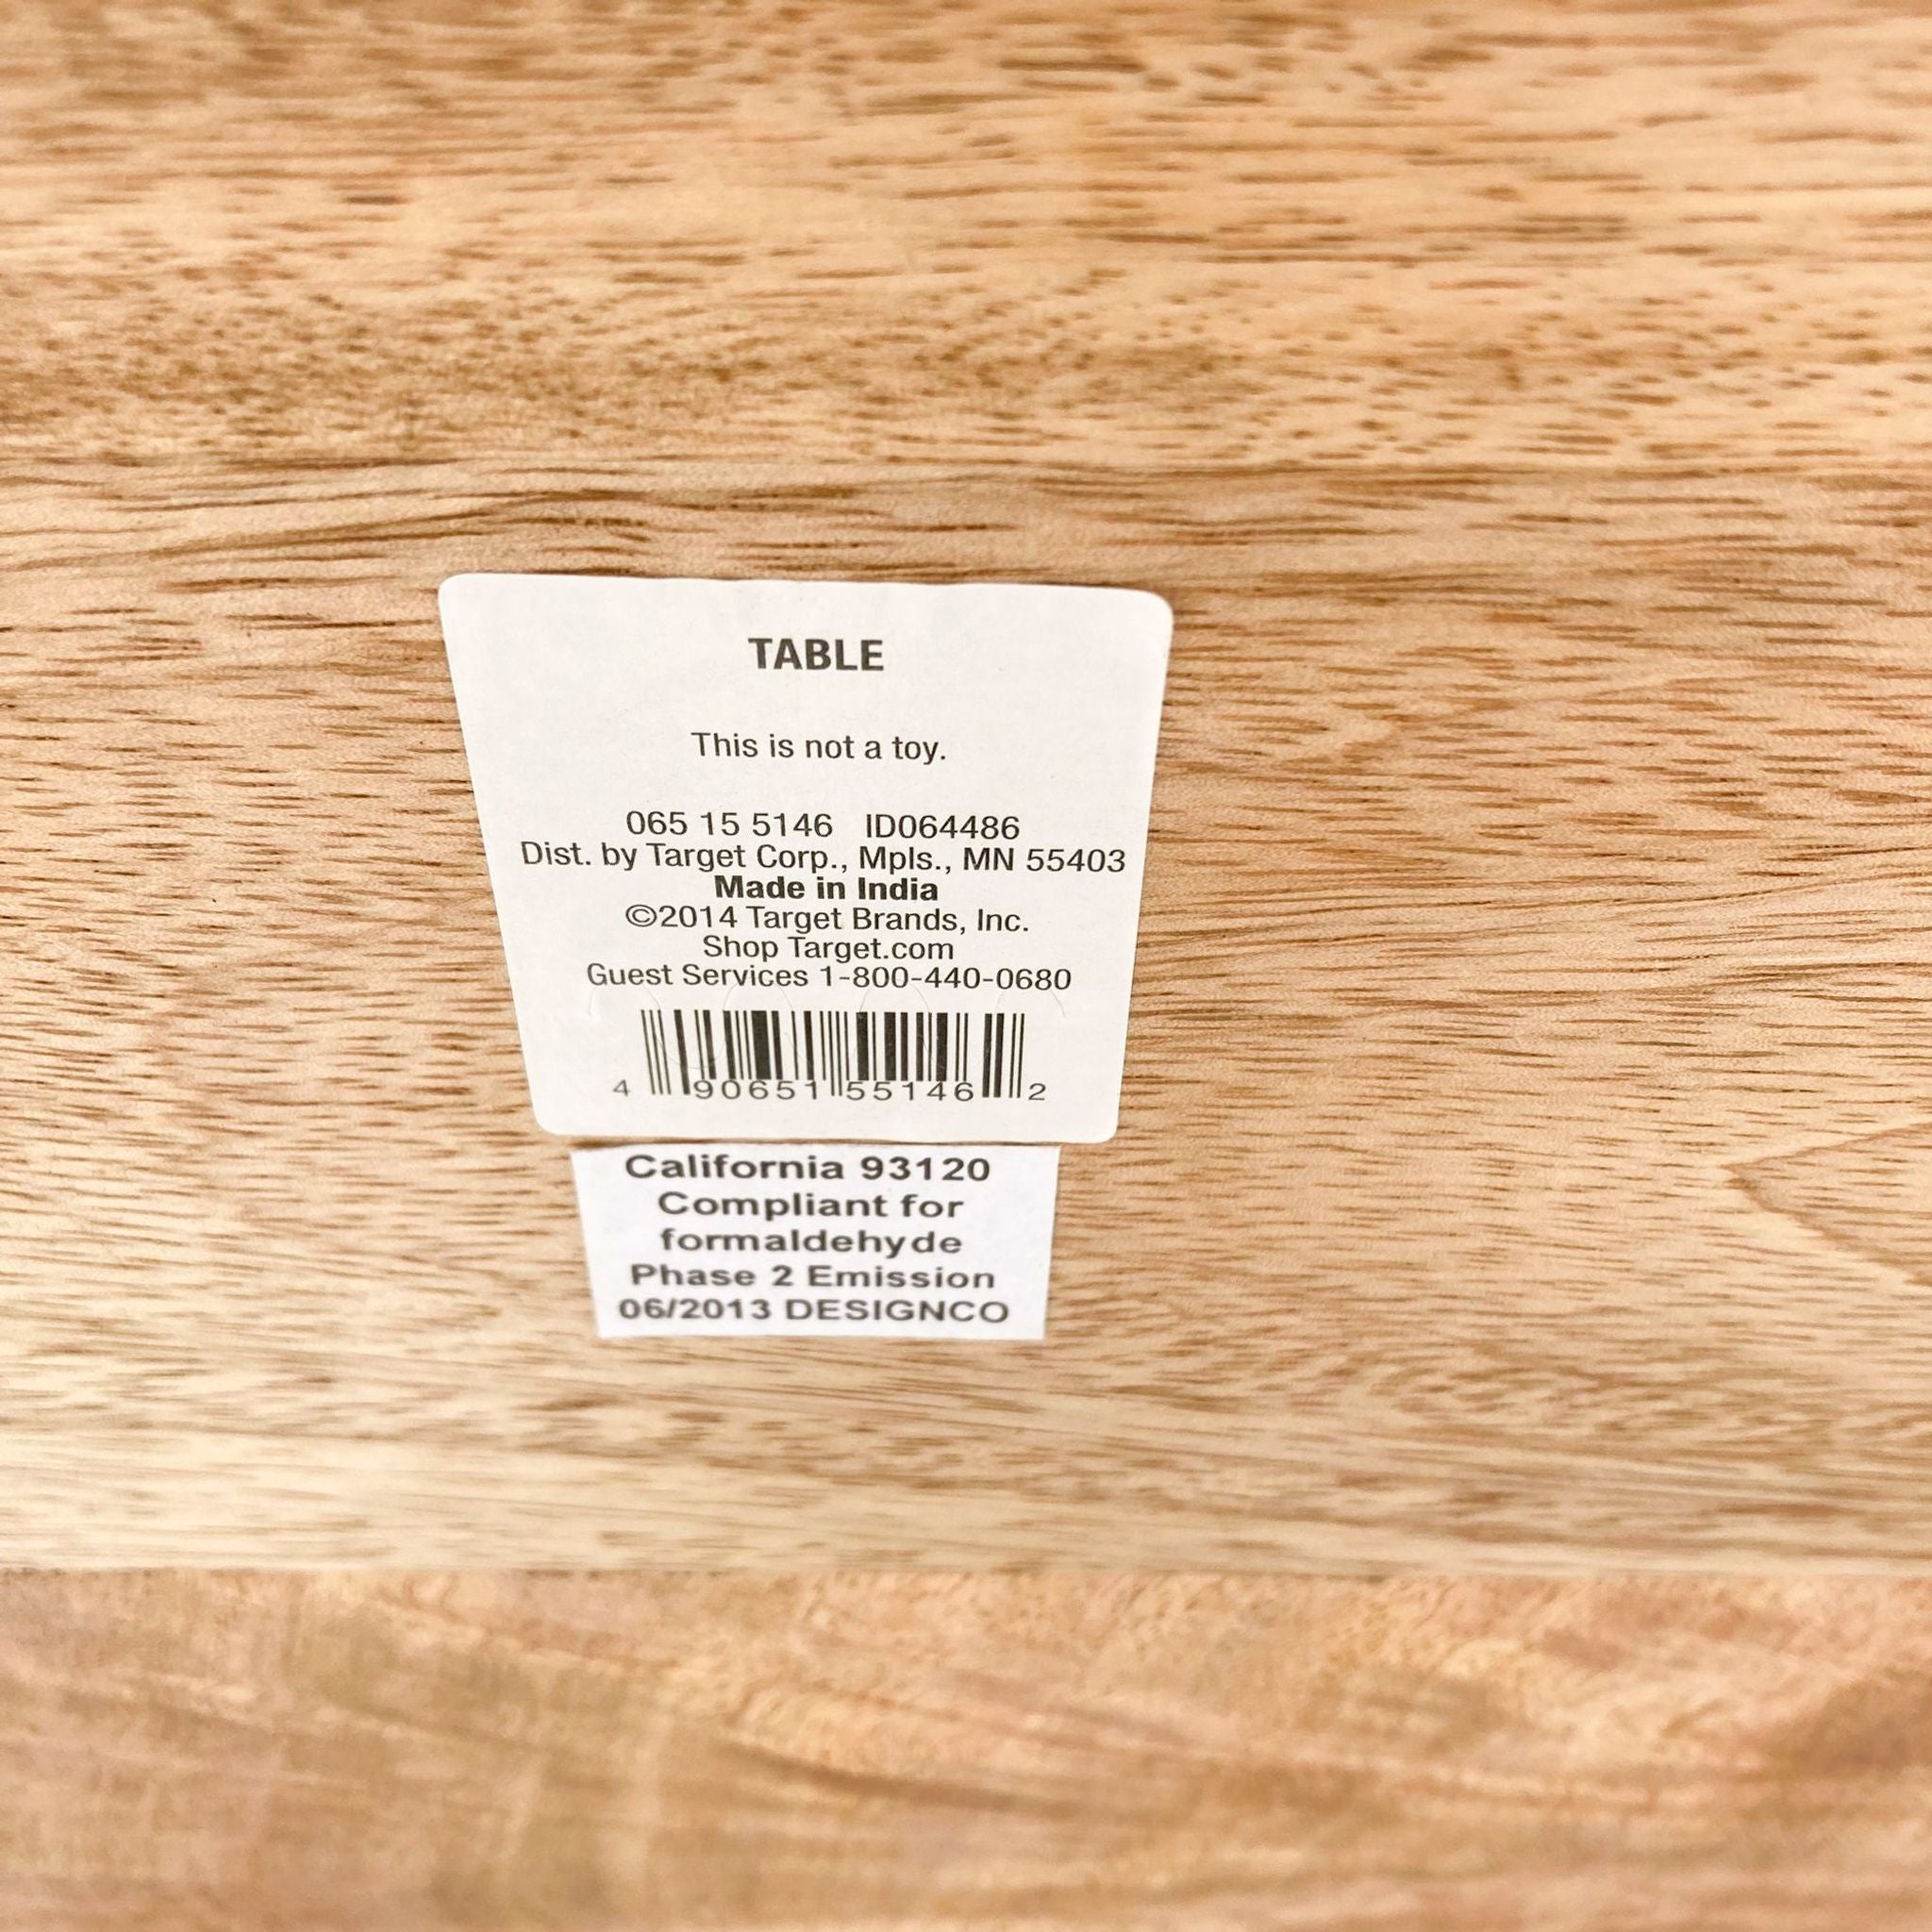 Label on wood surface indicating a Target brand table, not a toy, with compliance and contact information.